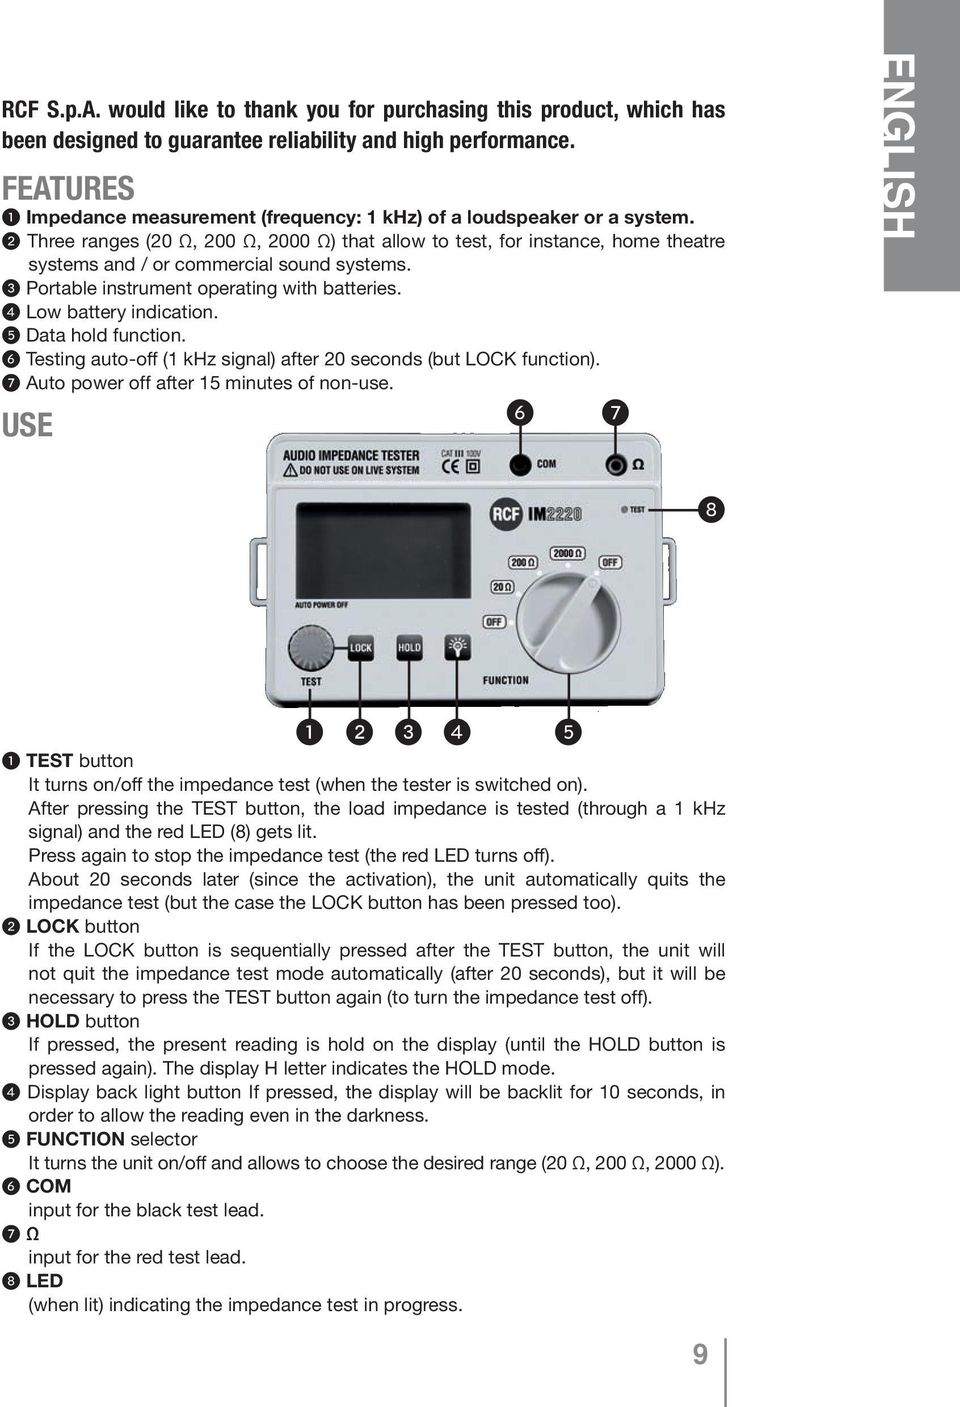 2 Three ranges (20 Ω, 200 Ω, 2000 Ω) that allow to test, for instance, home theatre systems and / or commercial sound systems. 3 Portable instrument operating with batteries. 4 Low battery indication.